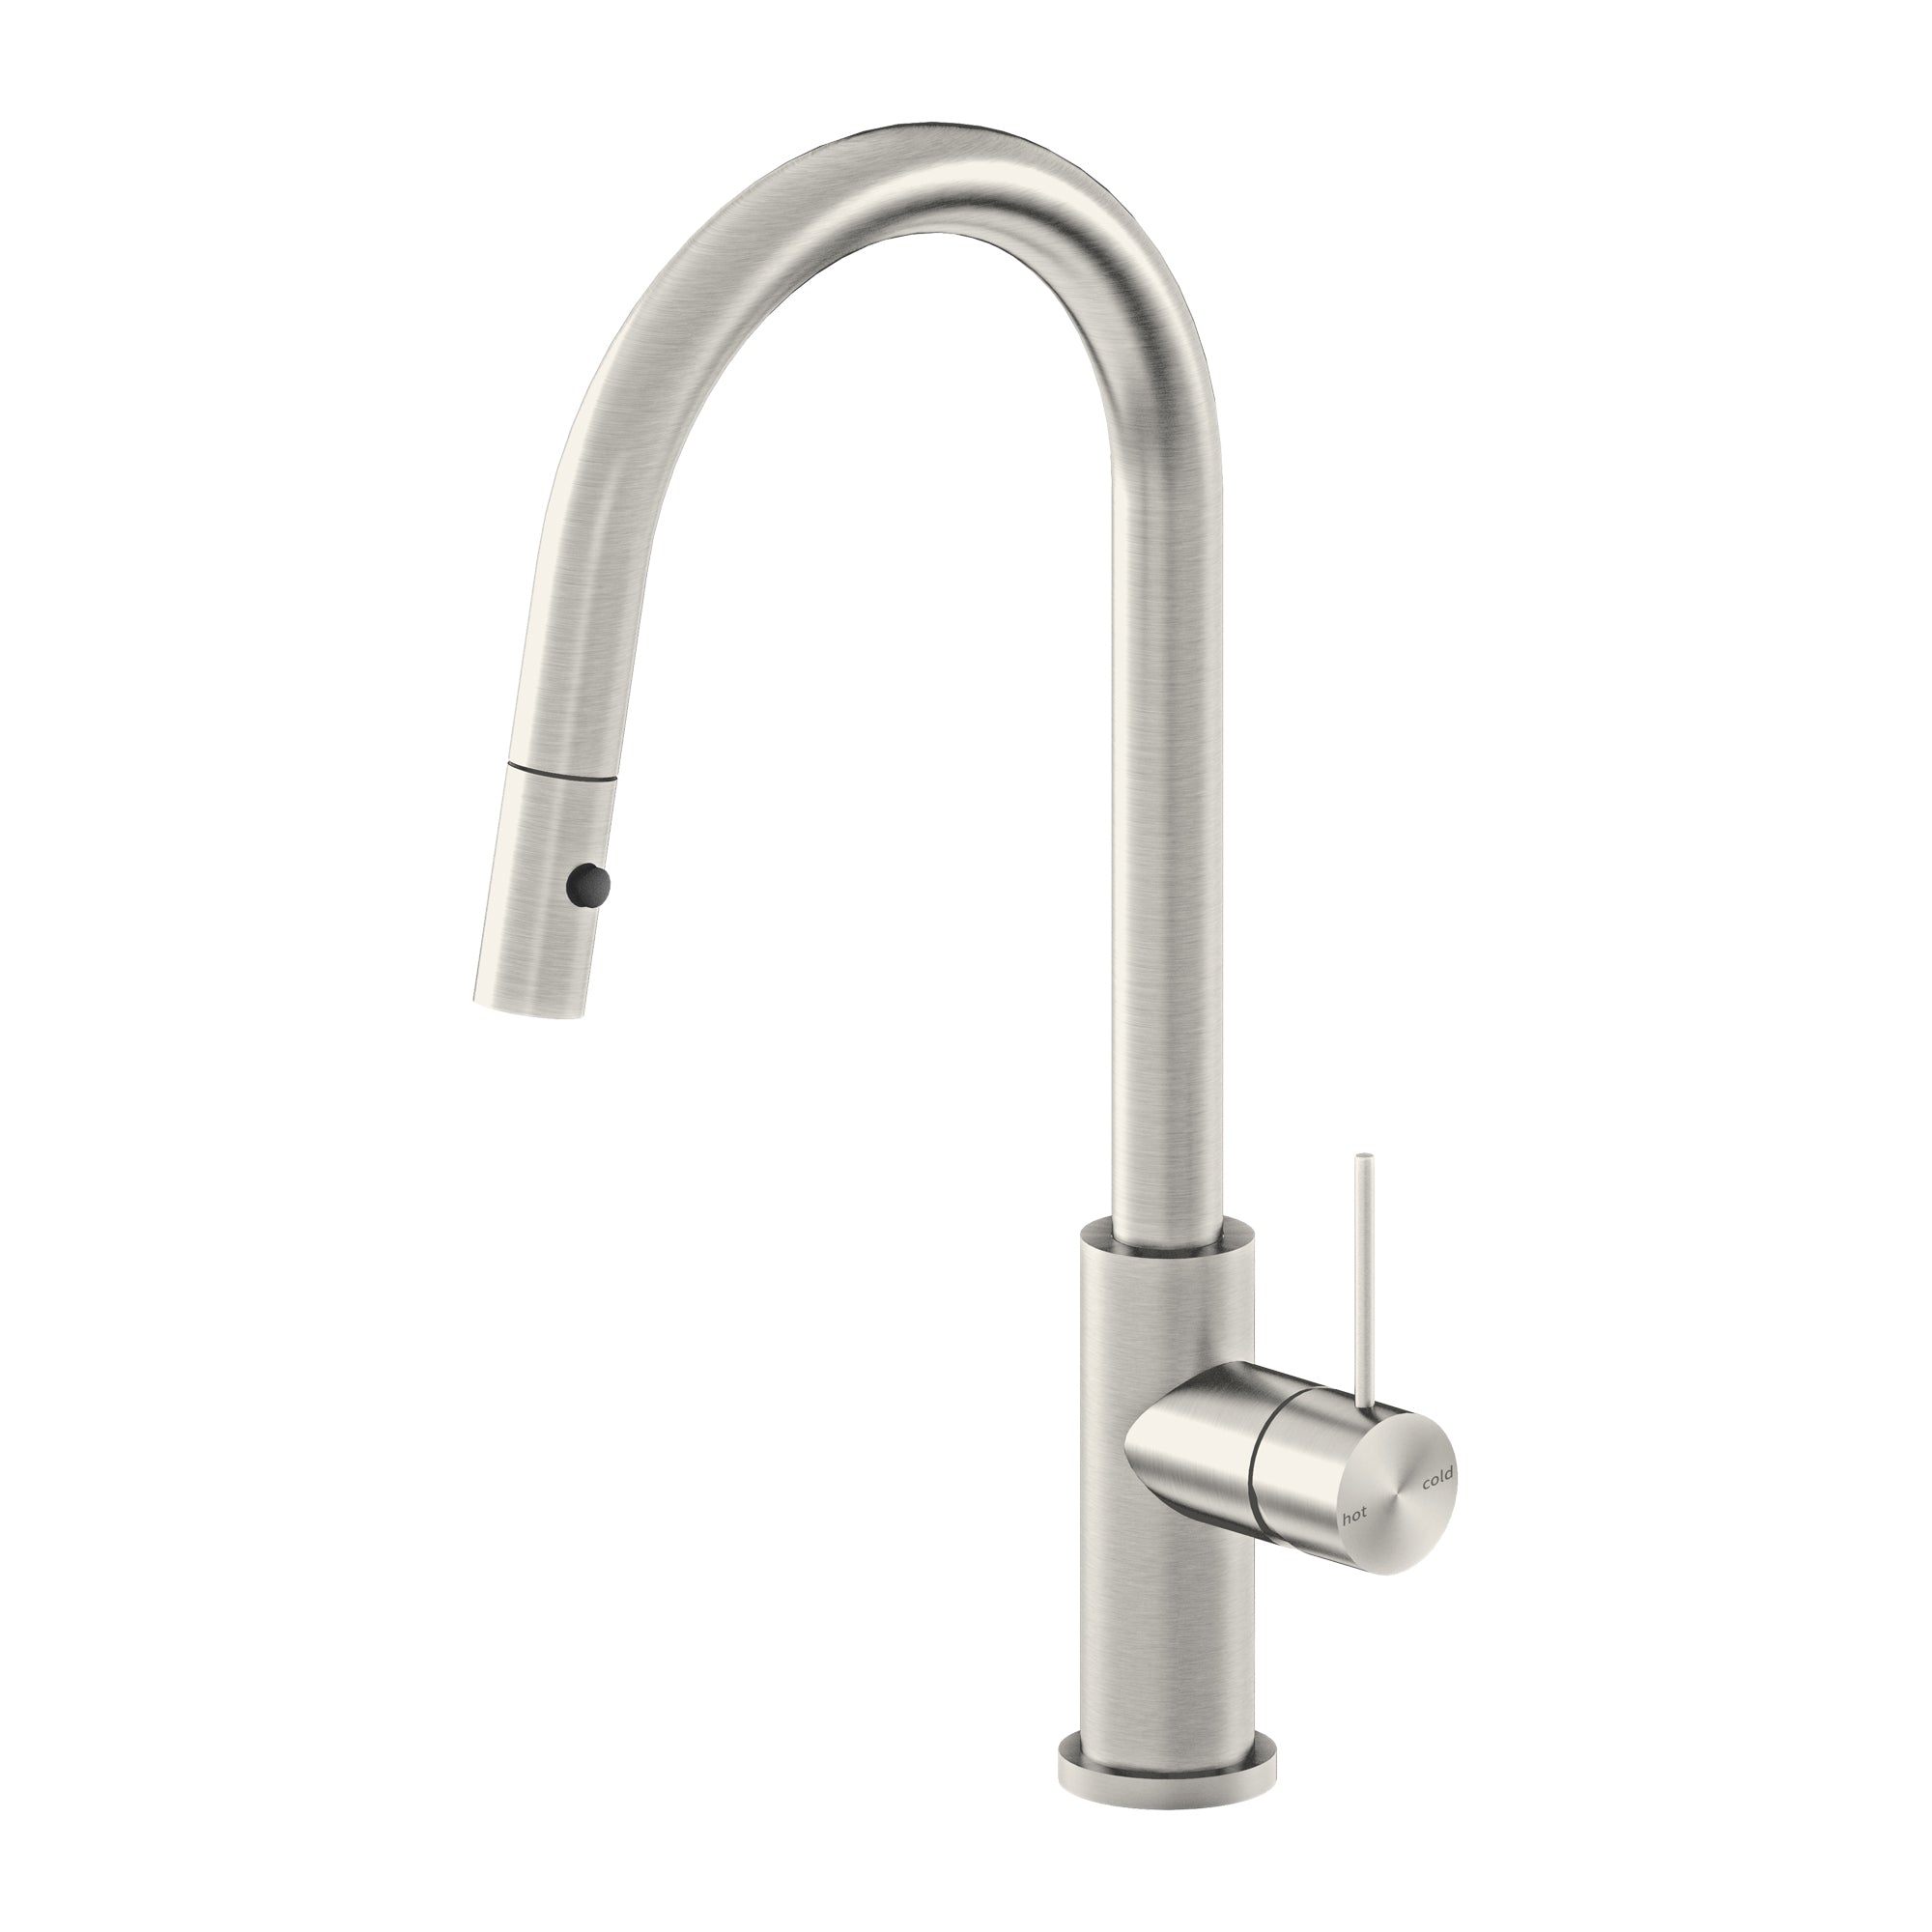 MECCA PULL OUT SINK MIXER WITH VEGIE SPRAY FUNCTION BRUSHED NICKEL